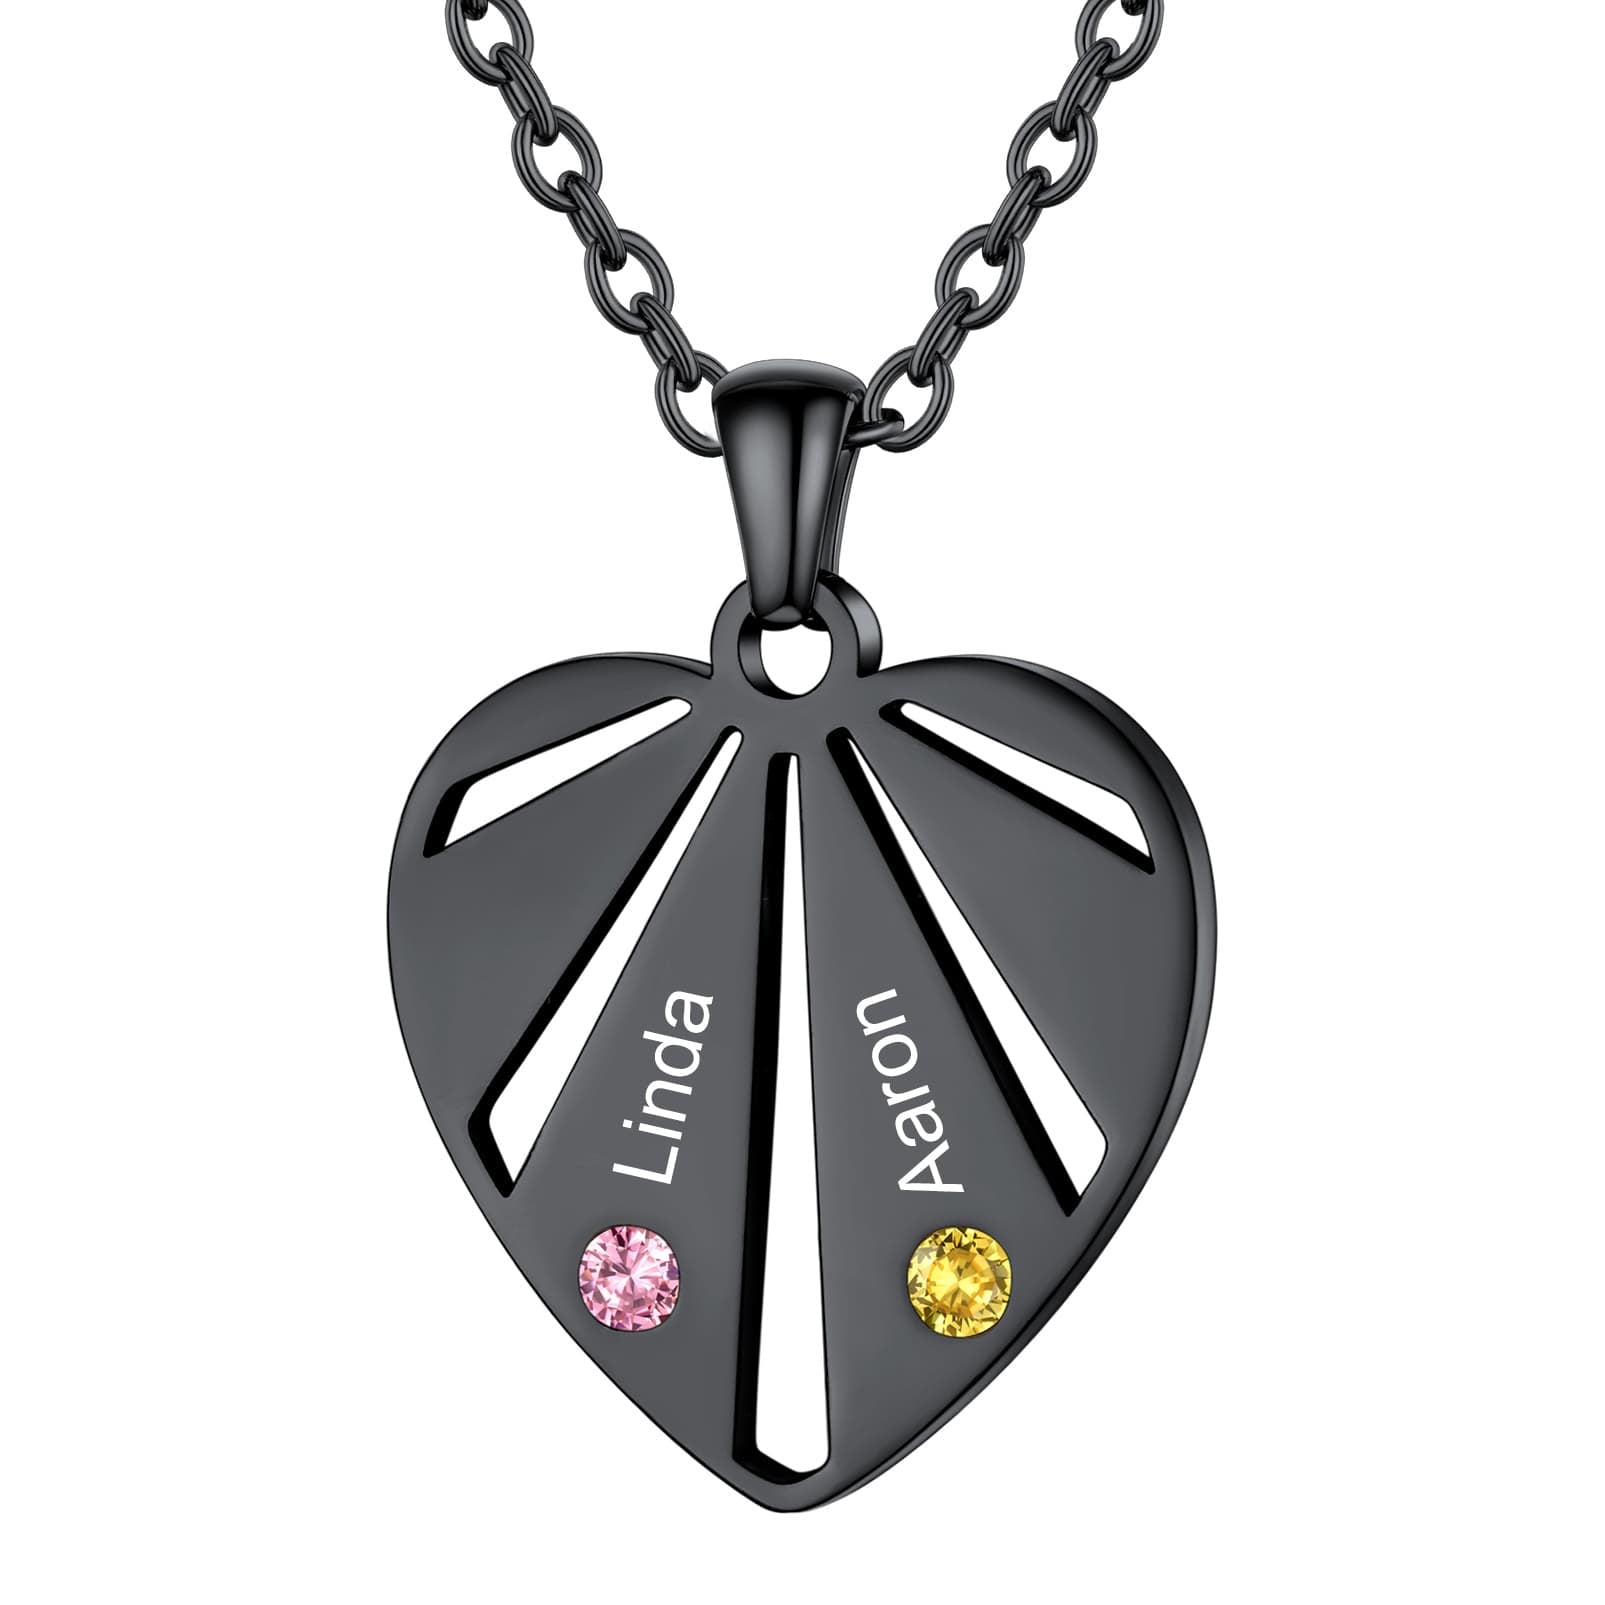 Personalized Engraved Heart Birthstone Necklace 2 stones